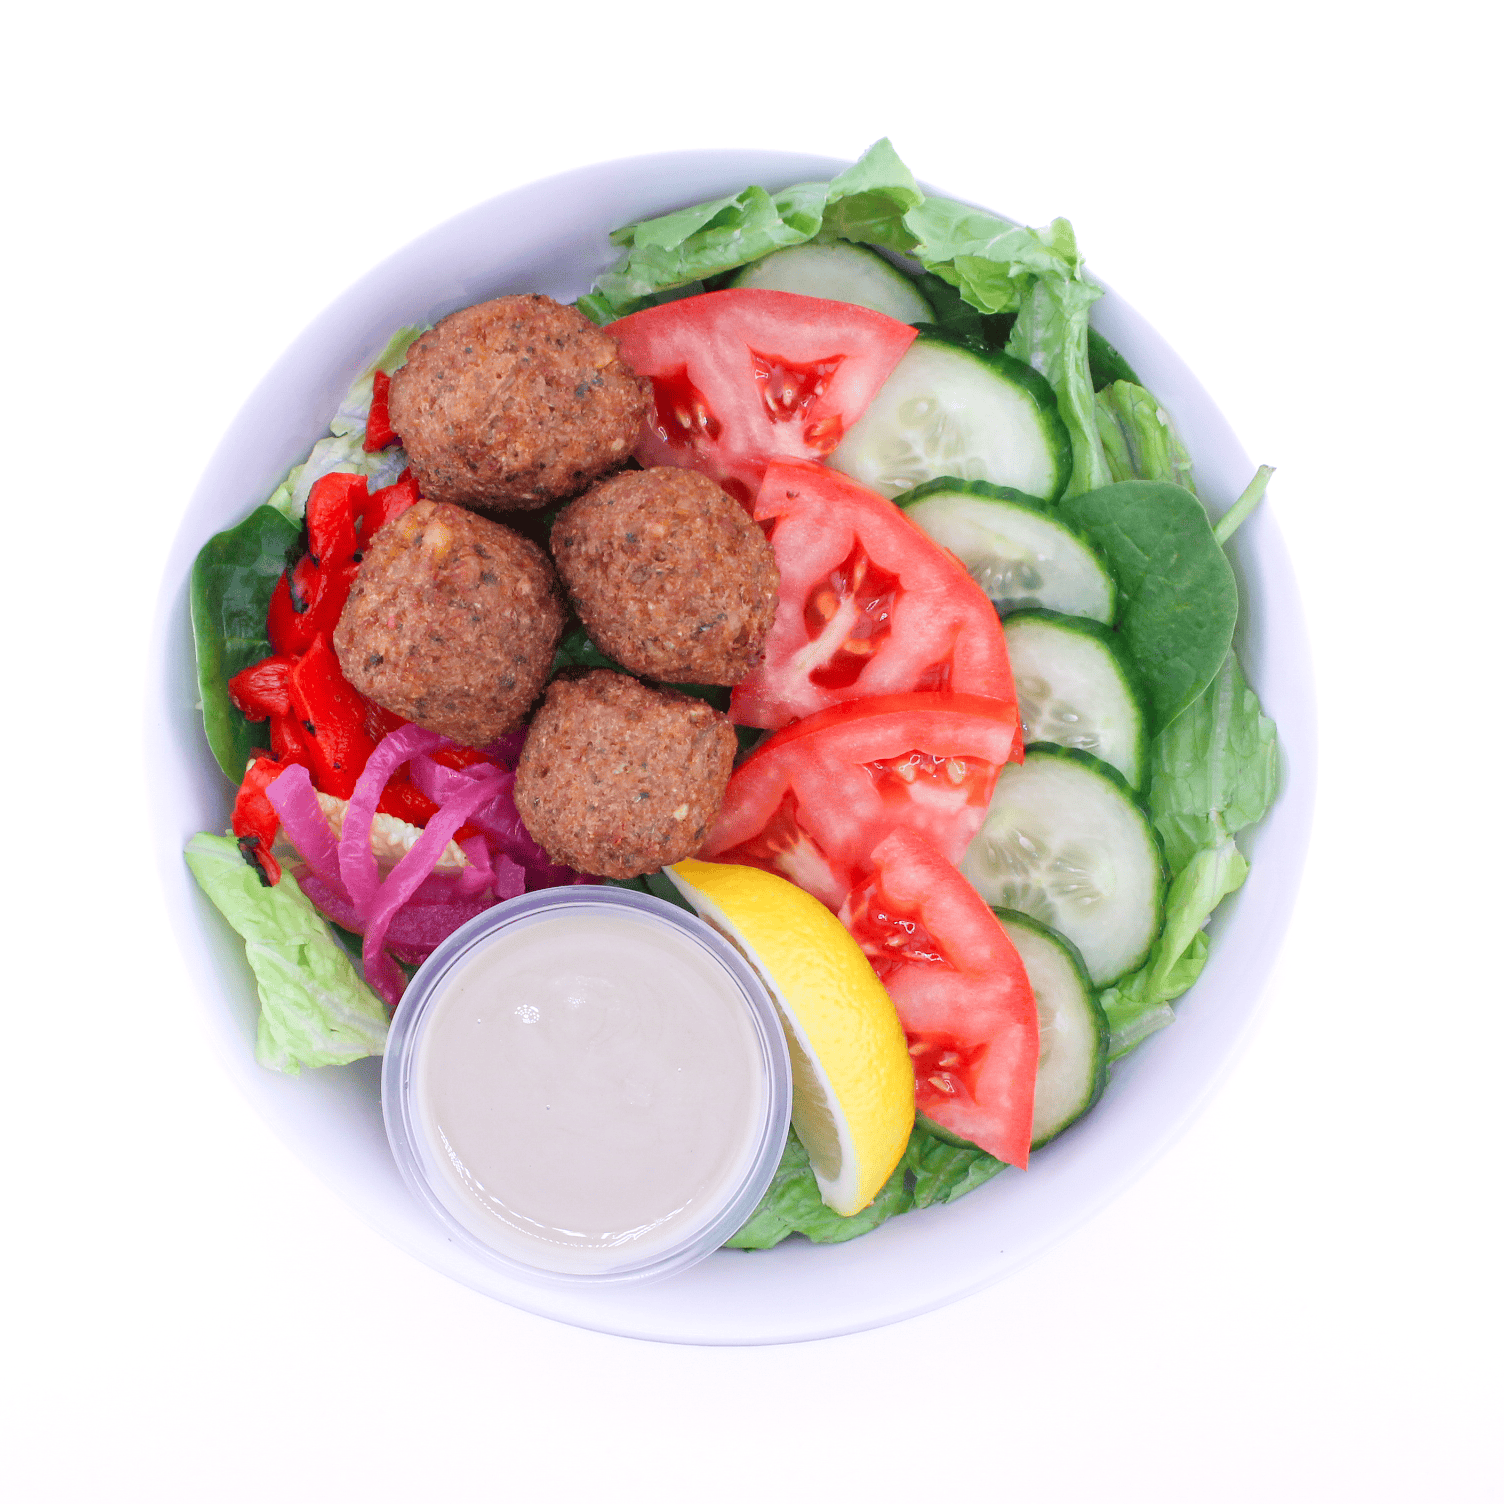 Falafel, tomatoes, roasted red peppers, cucumbers, pickled red onions, mixed greens, tahini dressing